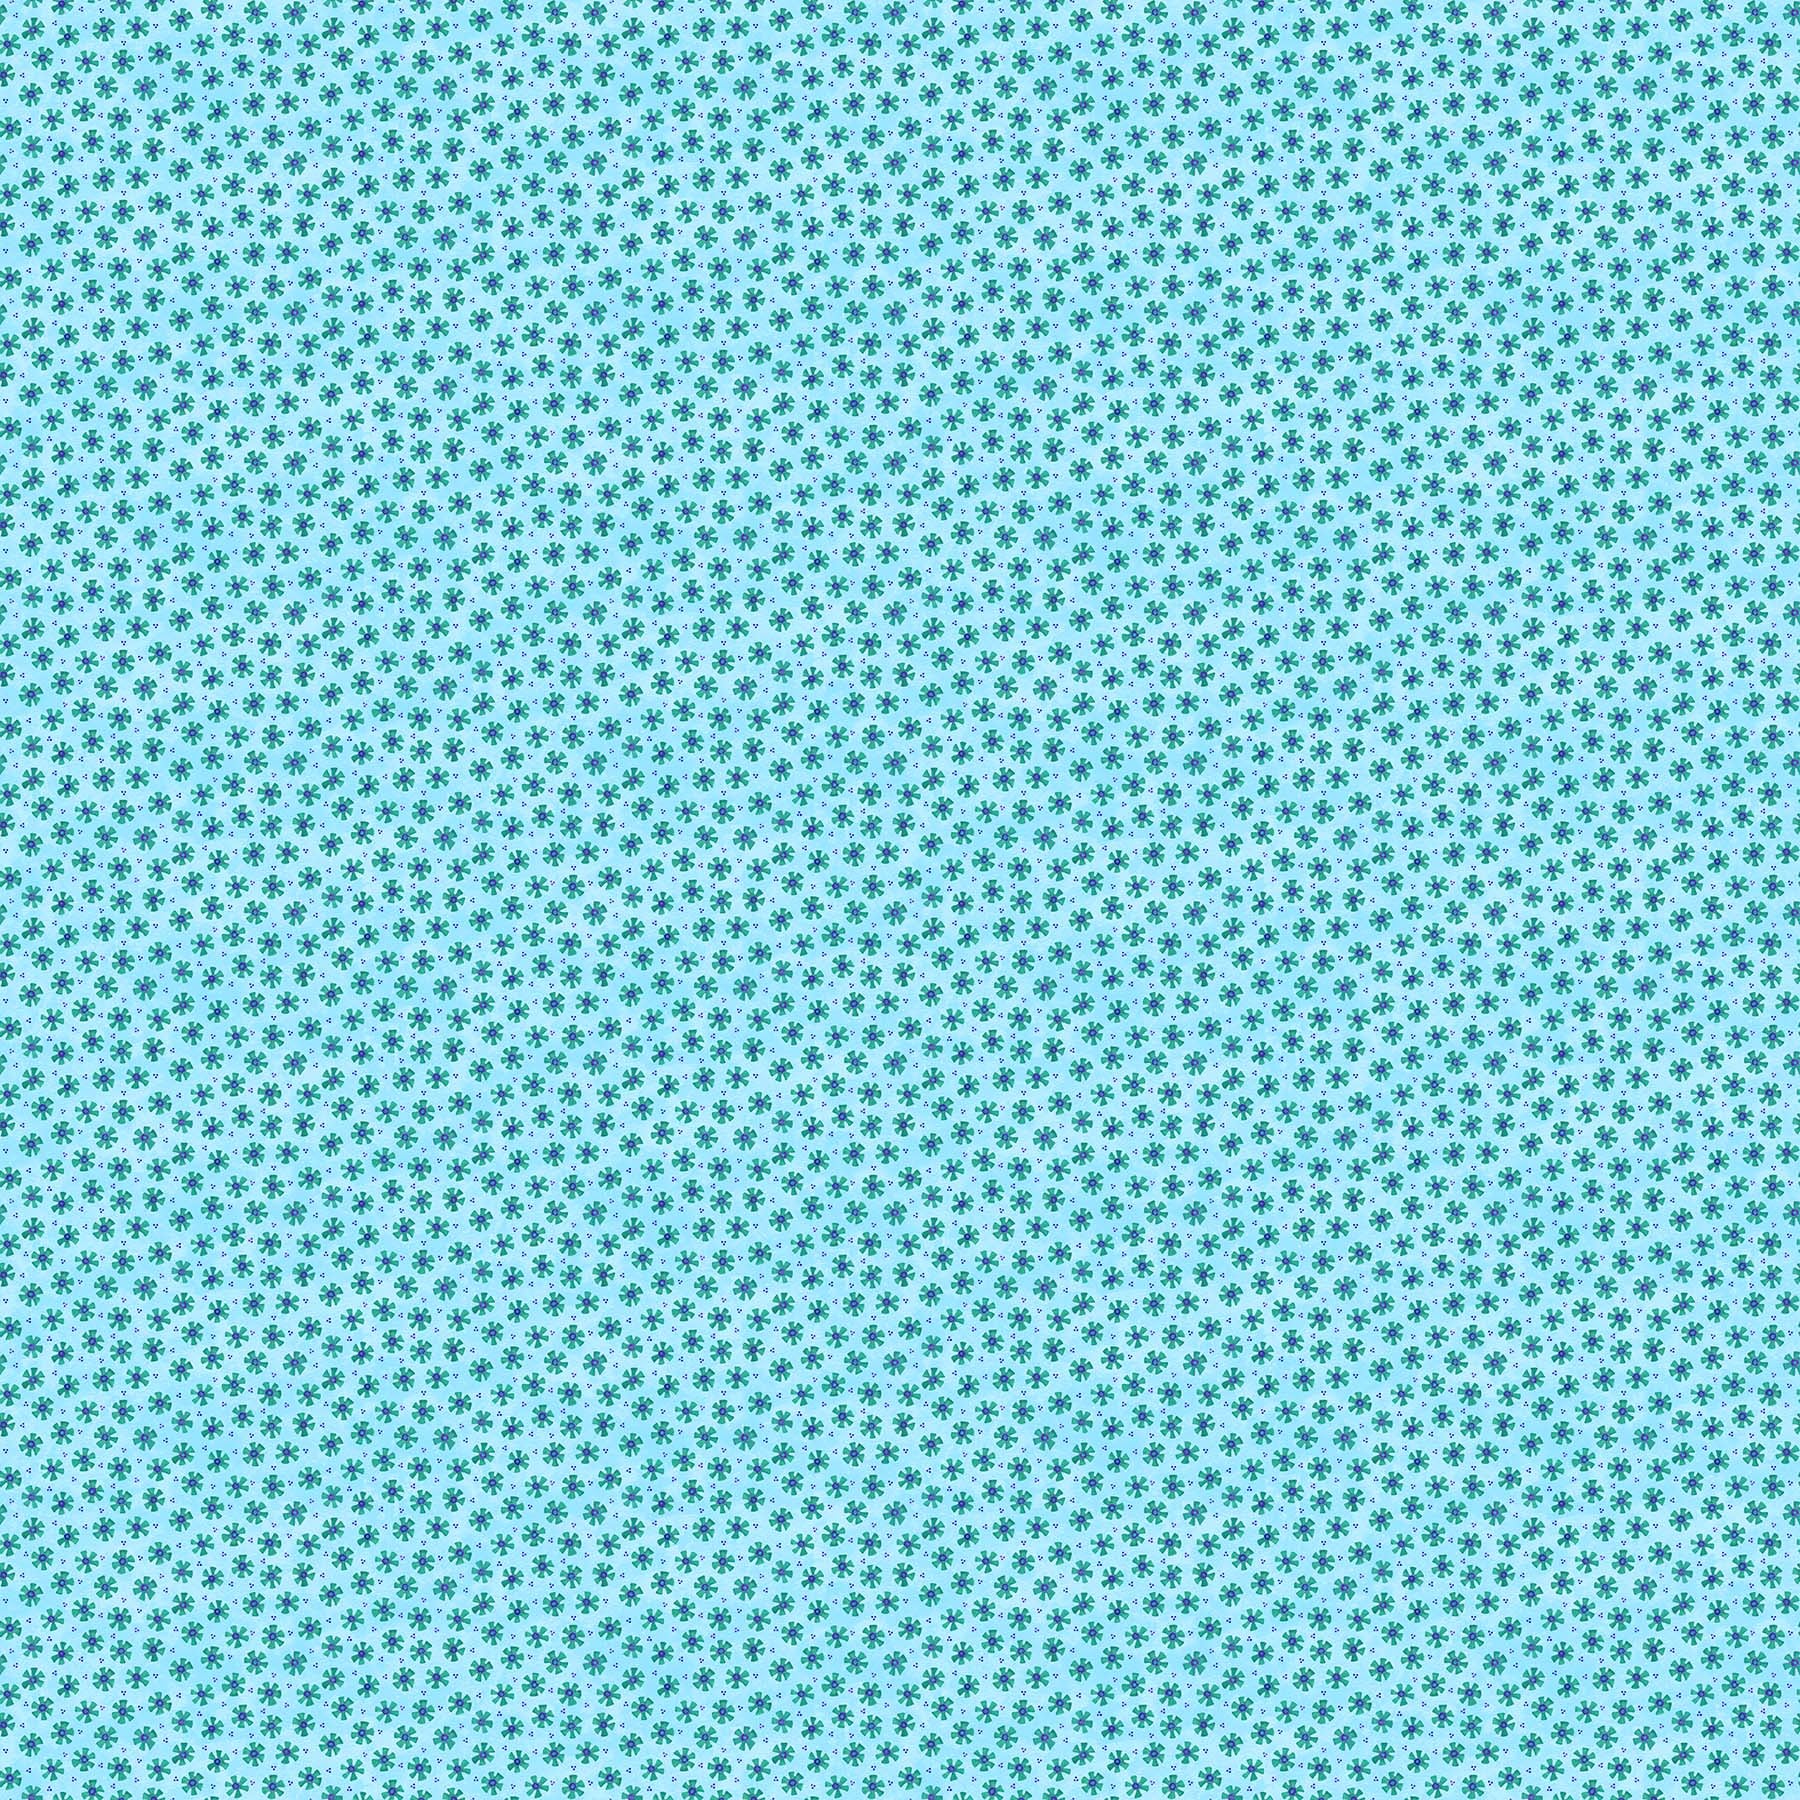 Quilts and Kuspuks Quilt Fabric - Turquoise Flower - 25211-62